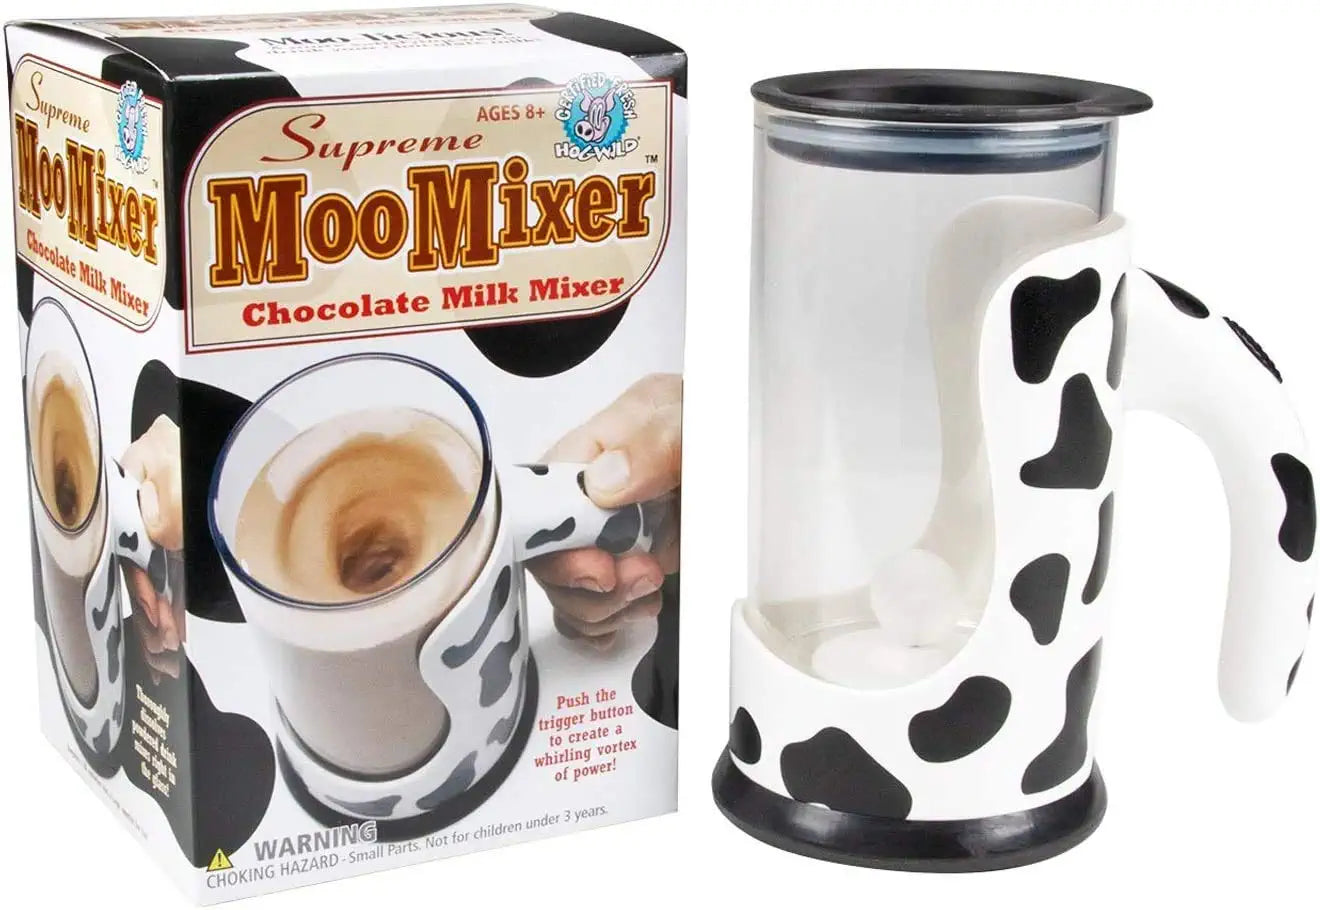 A chocolate milk mixing cup with packaging.